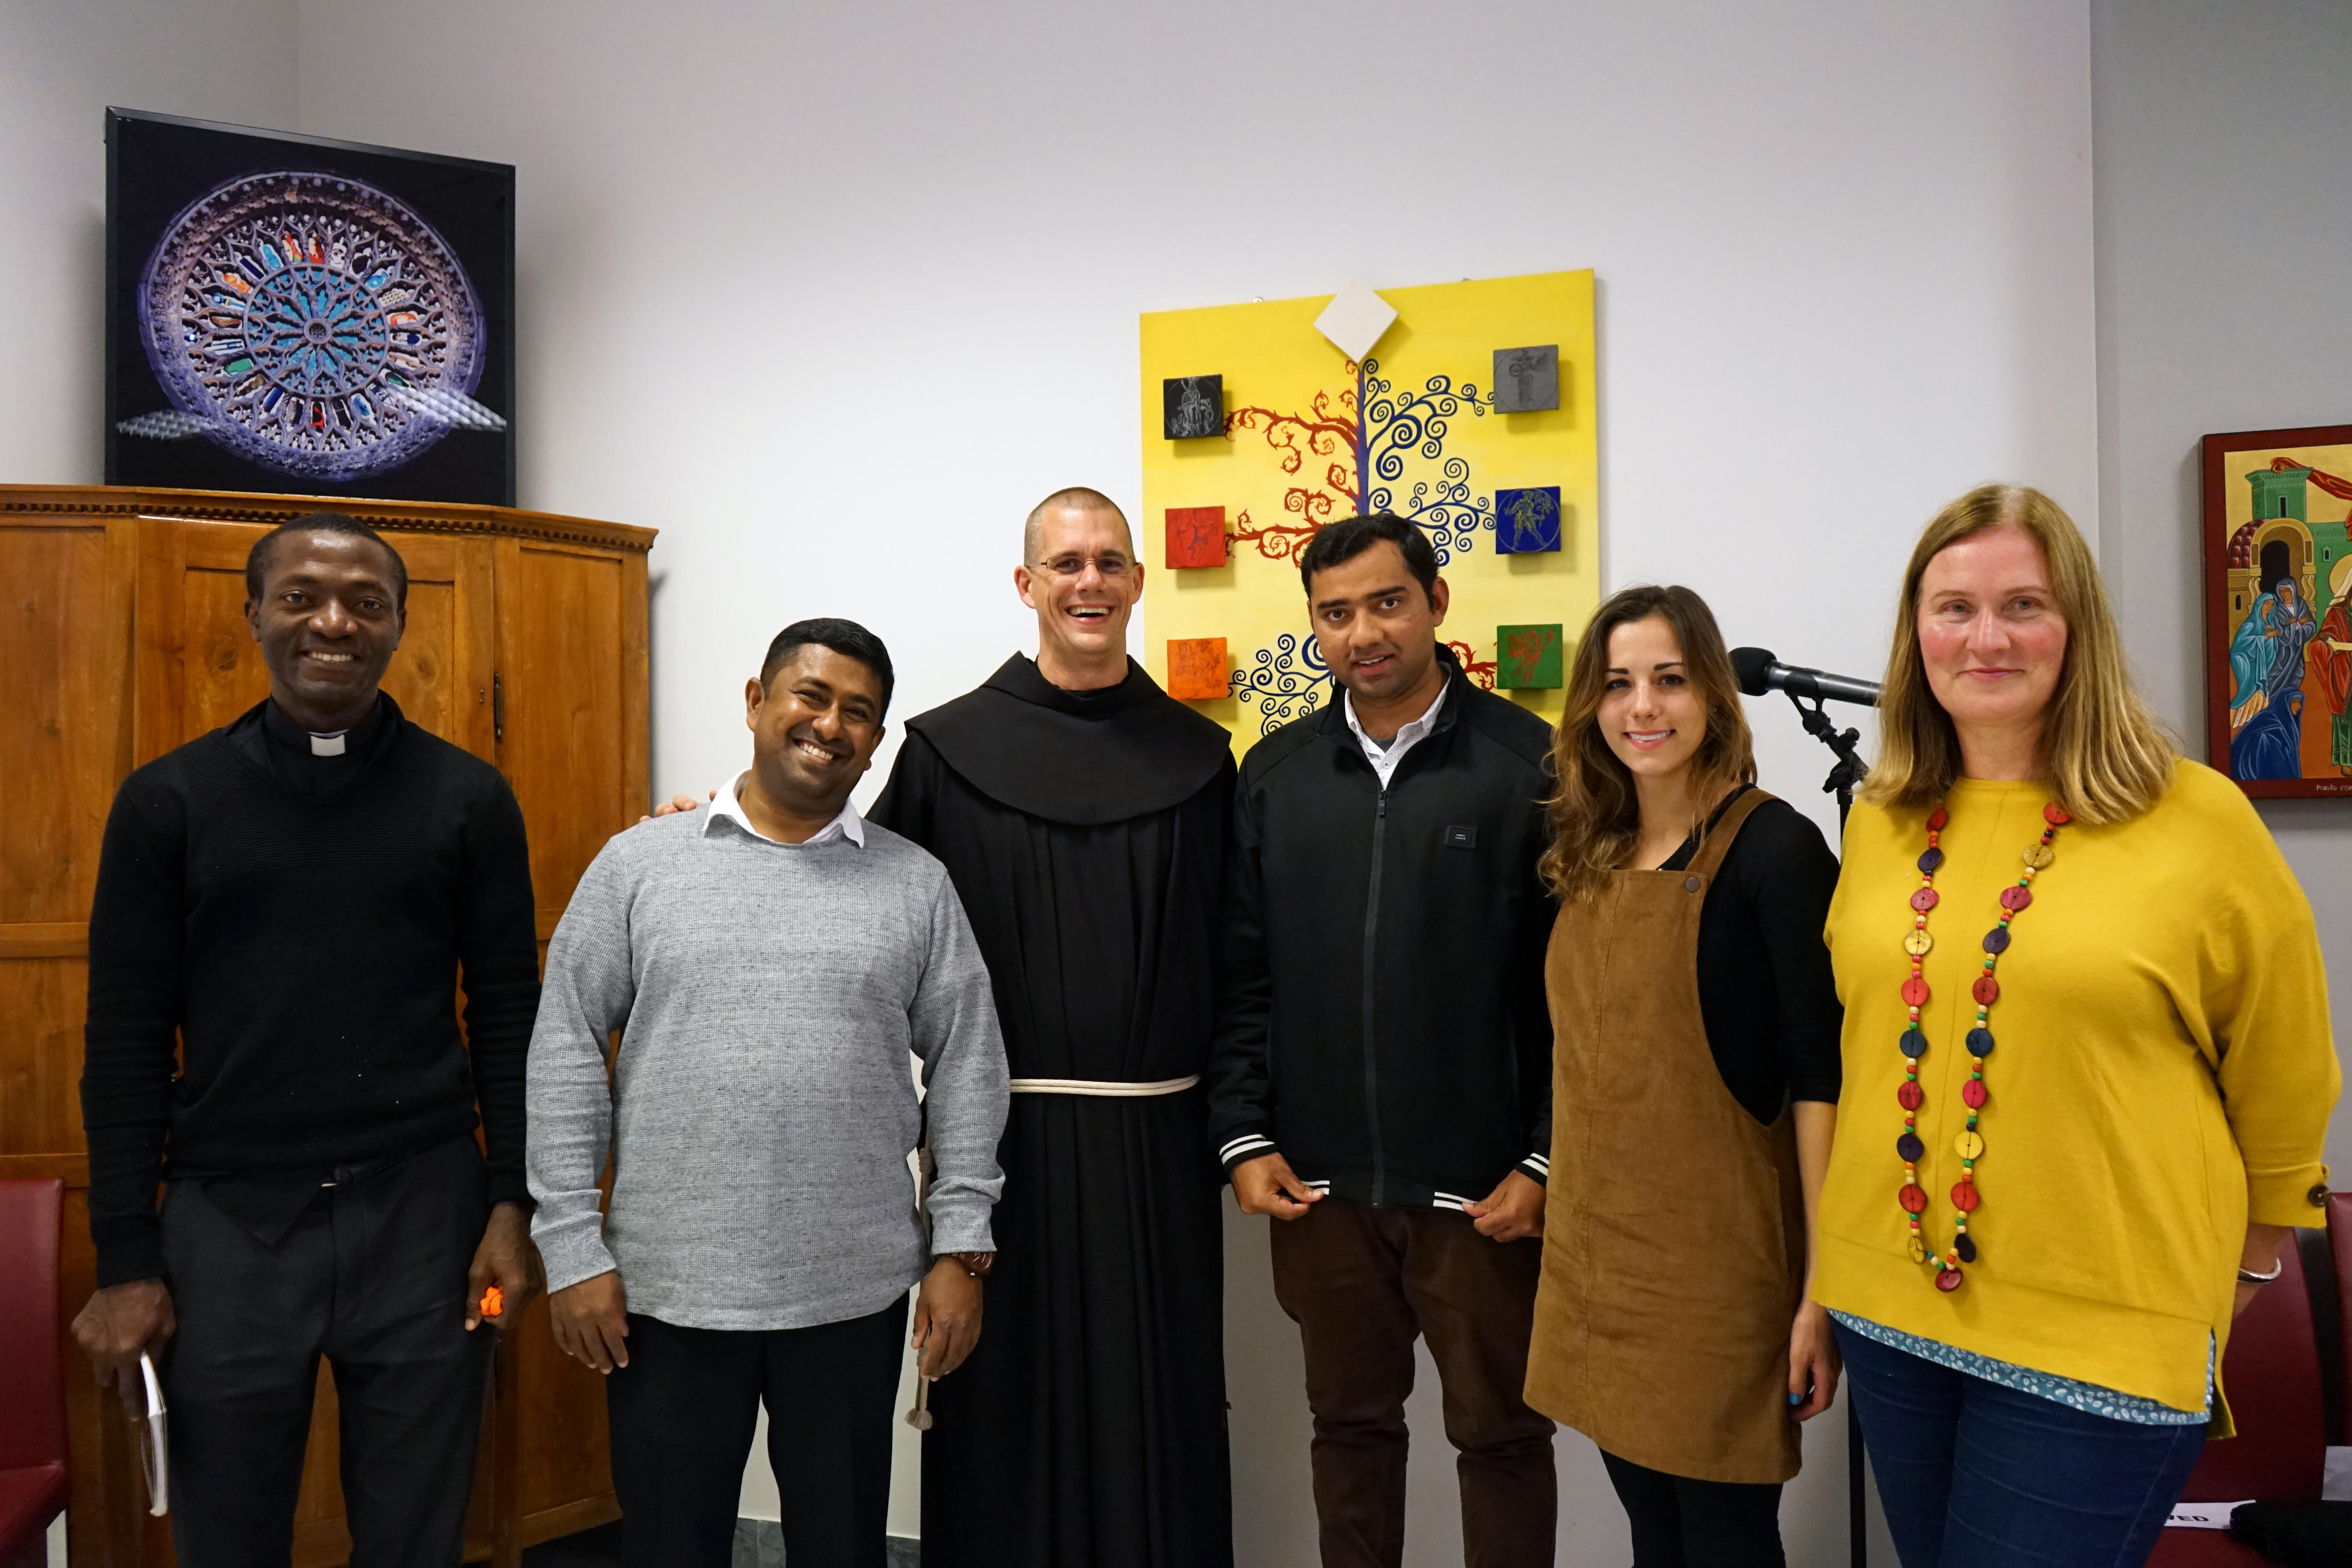 Russell Berrie Fellowship, Lay Centre foster interreligious dialogue in Rome